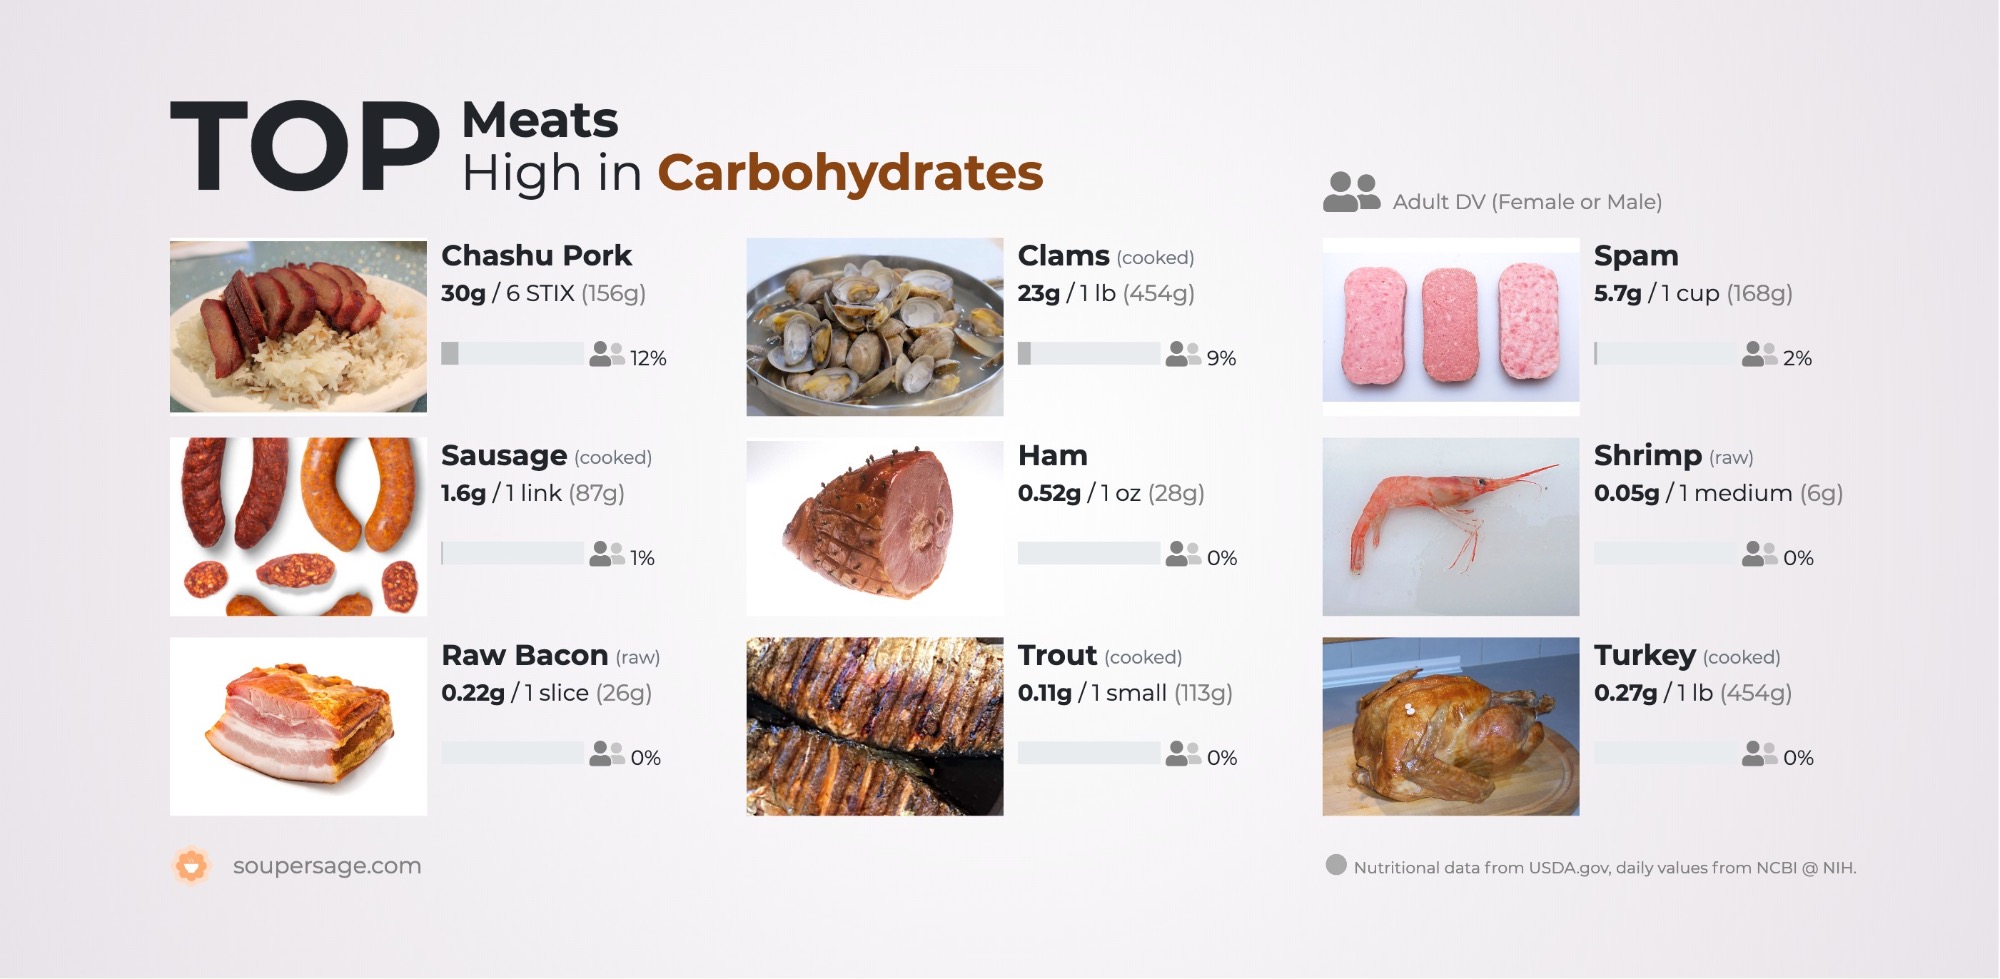 image of Top Meats High in Carbohydrates